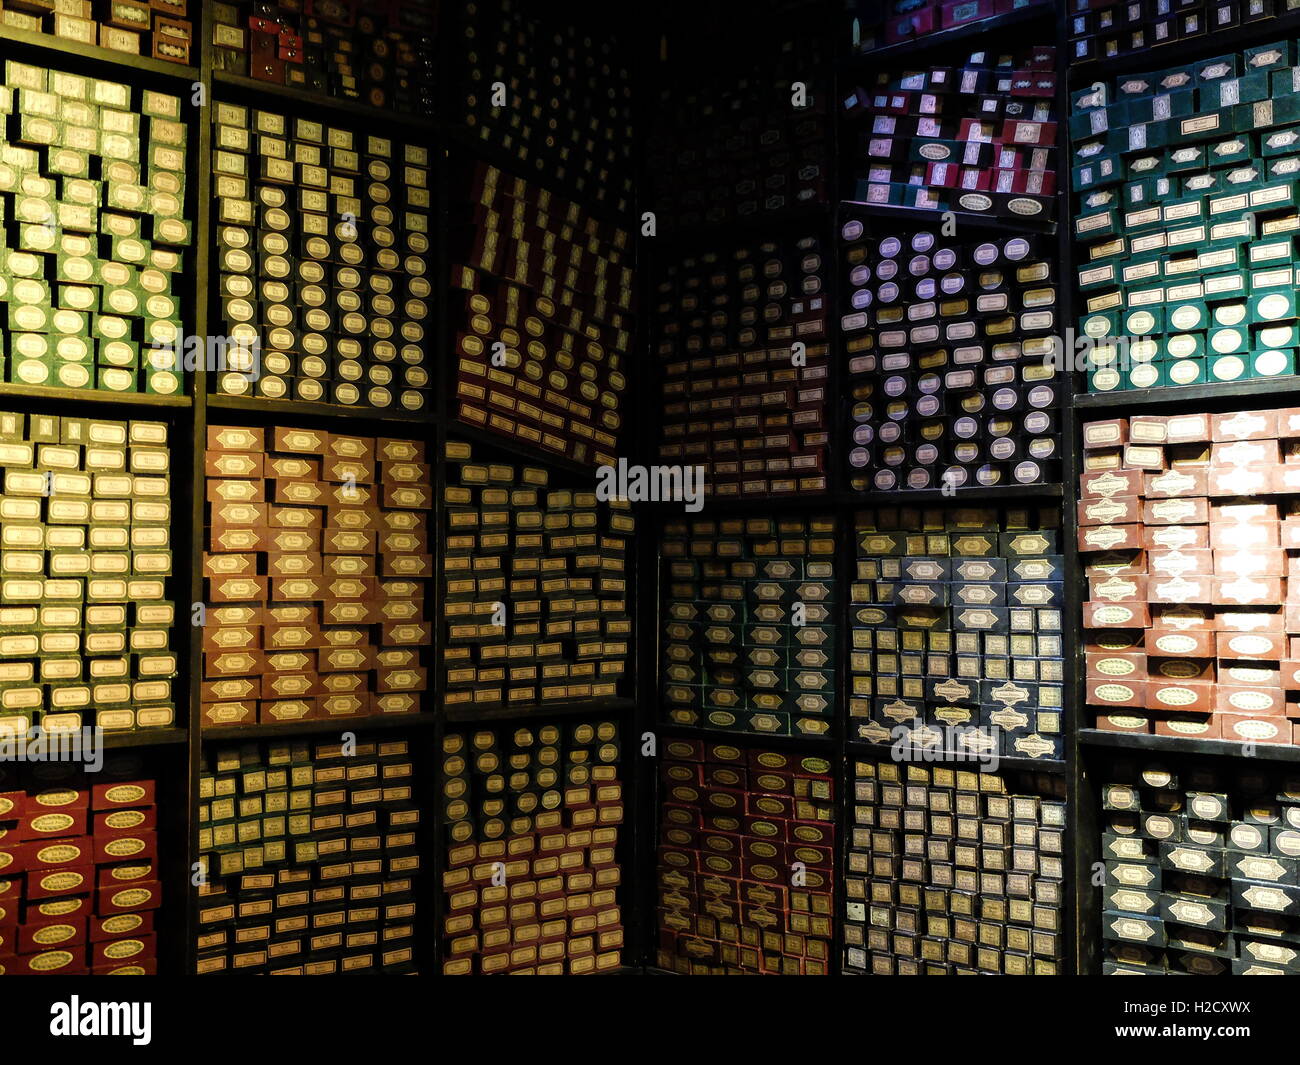 The Making of Harry Potter Warner Bros studio Tour, London. Wand boxes Stock Photo